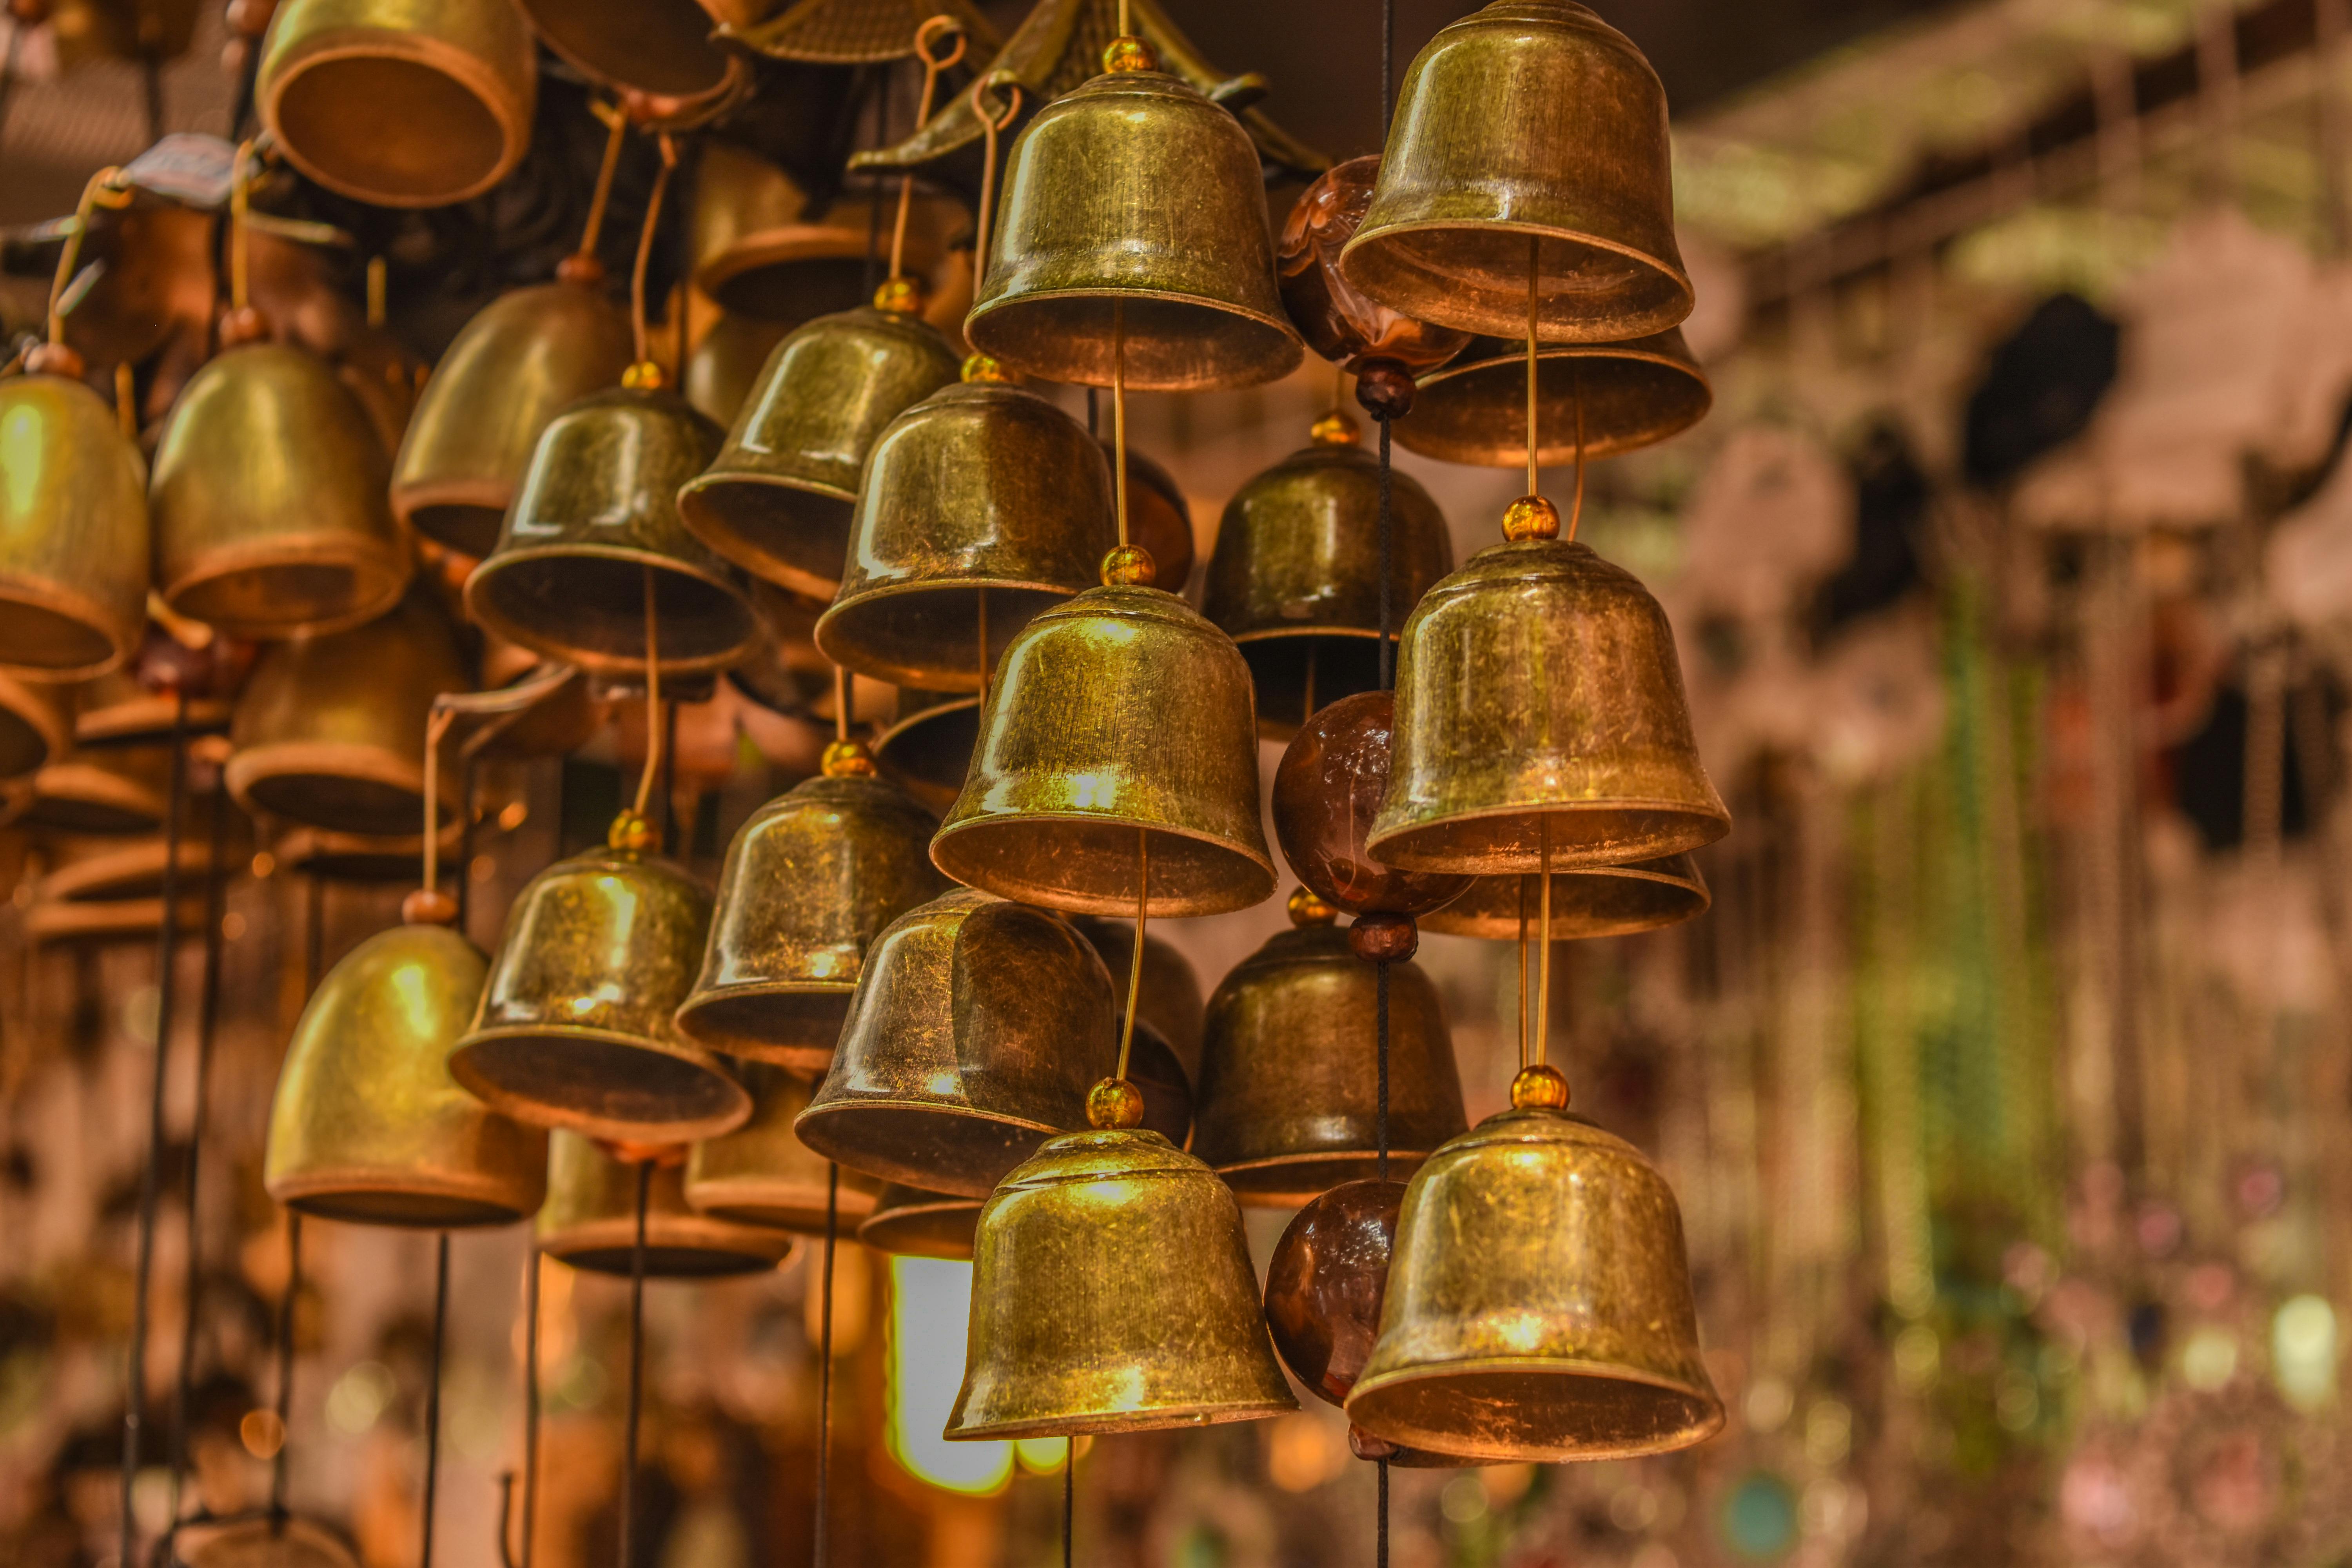 2,411 Classic Hanging Bell Royalty-Free Photos and Stock Images